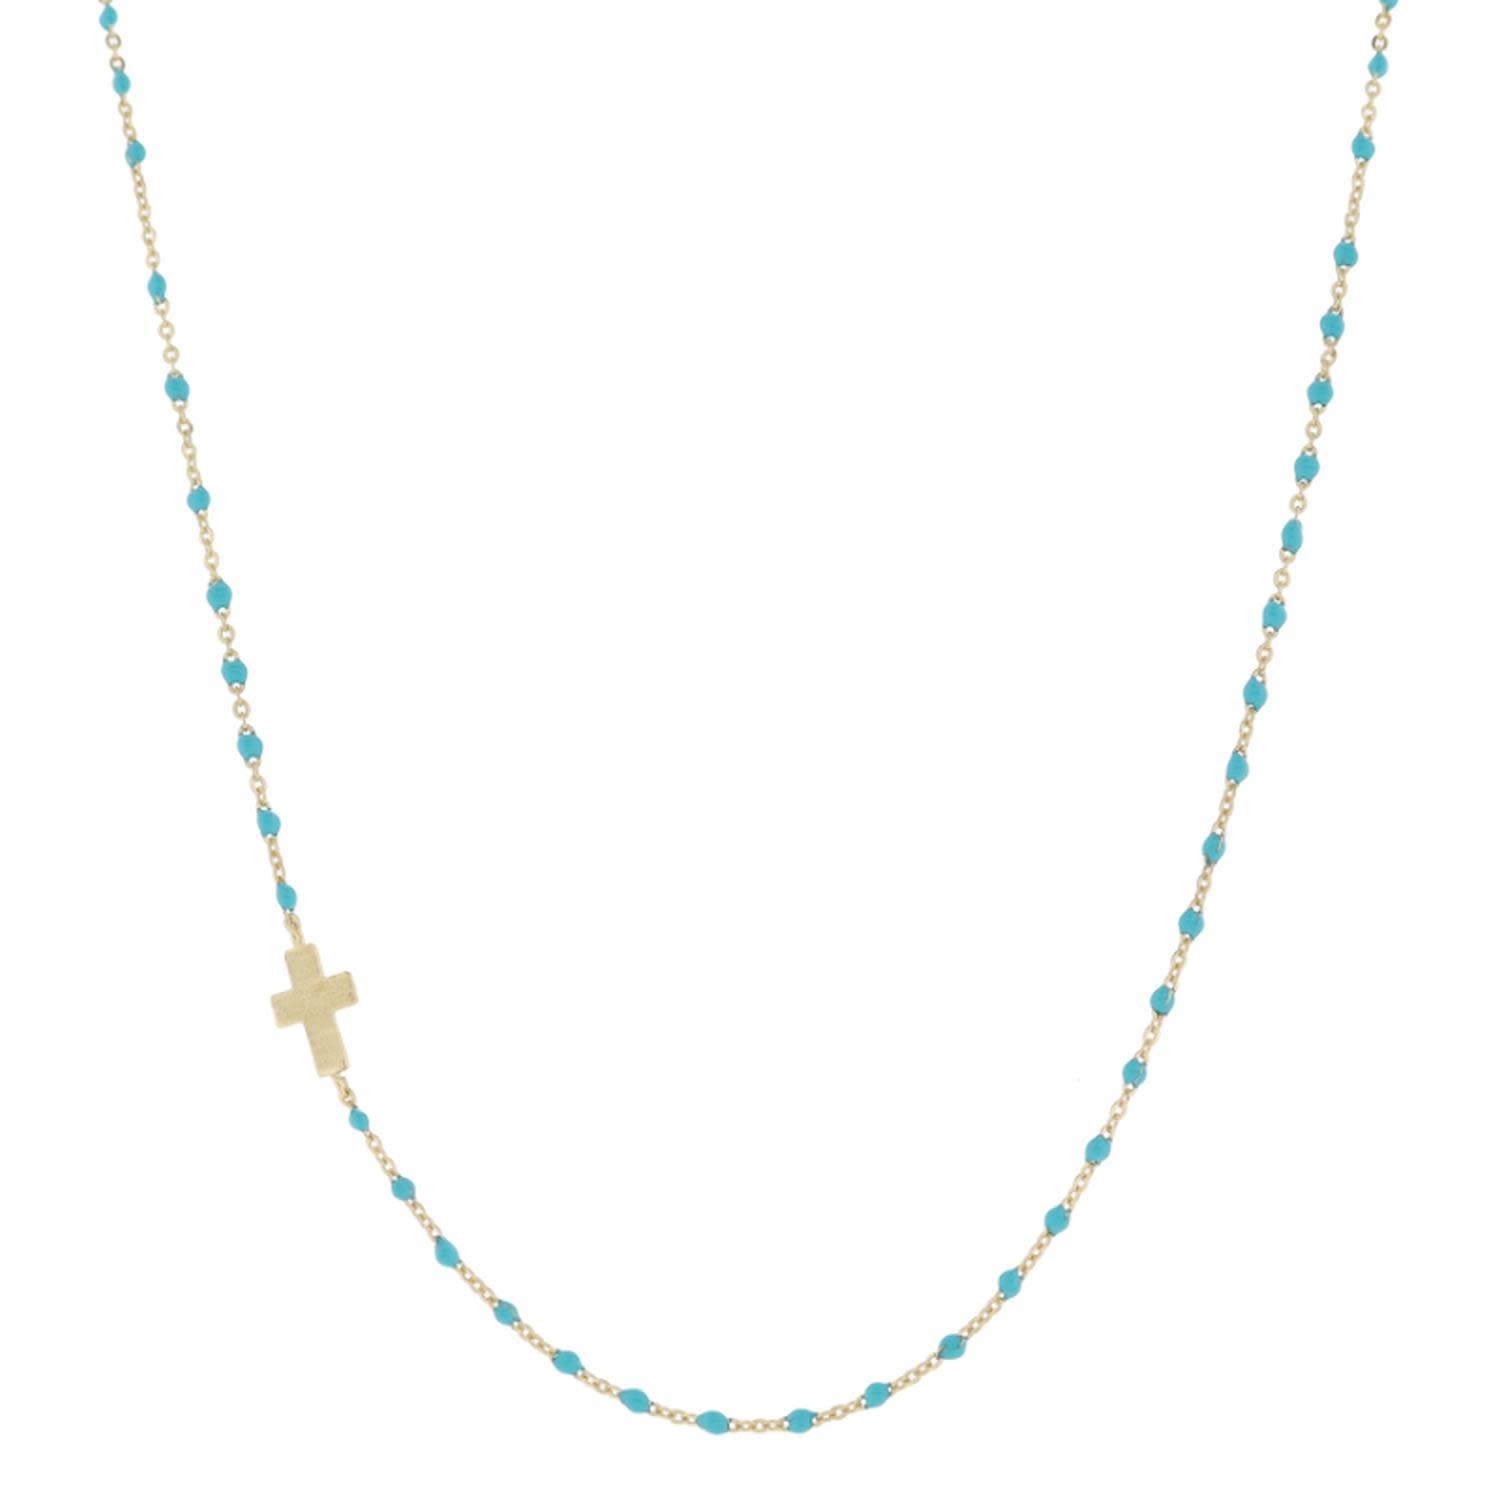 Dainty Turquoise Enamel Satellite Chain with Gold Cross in Chain Necklace